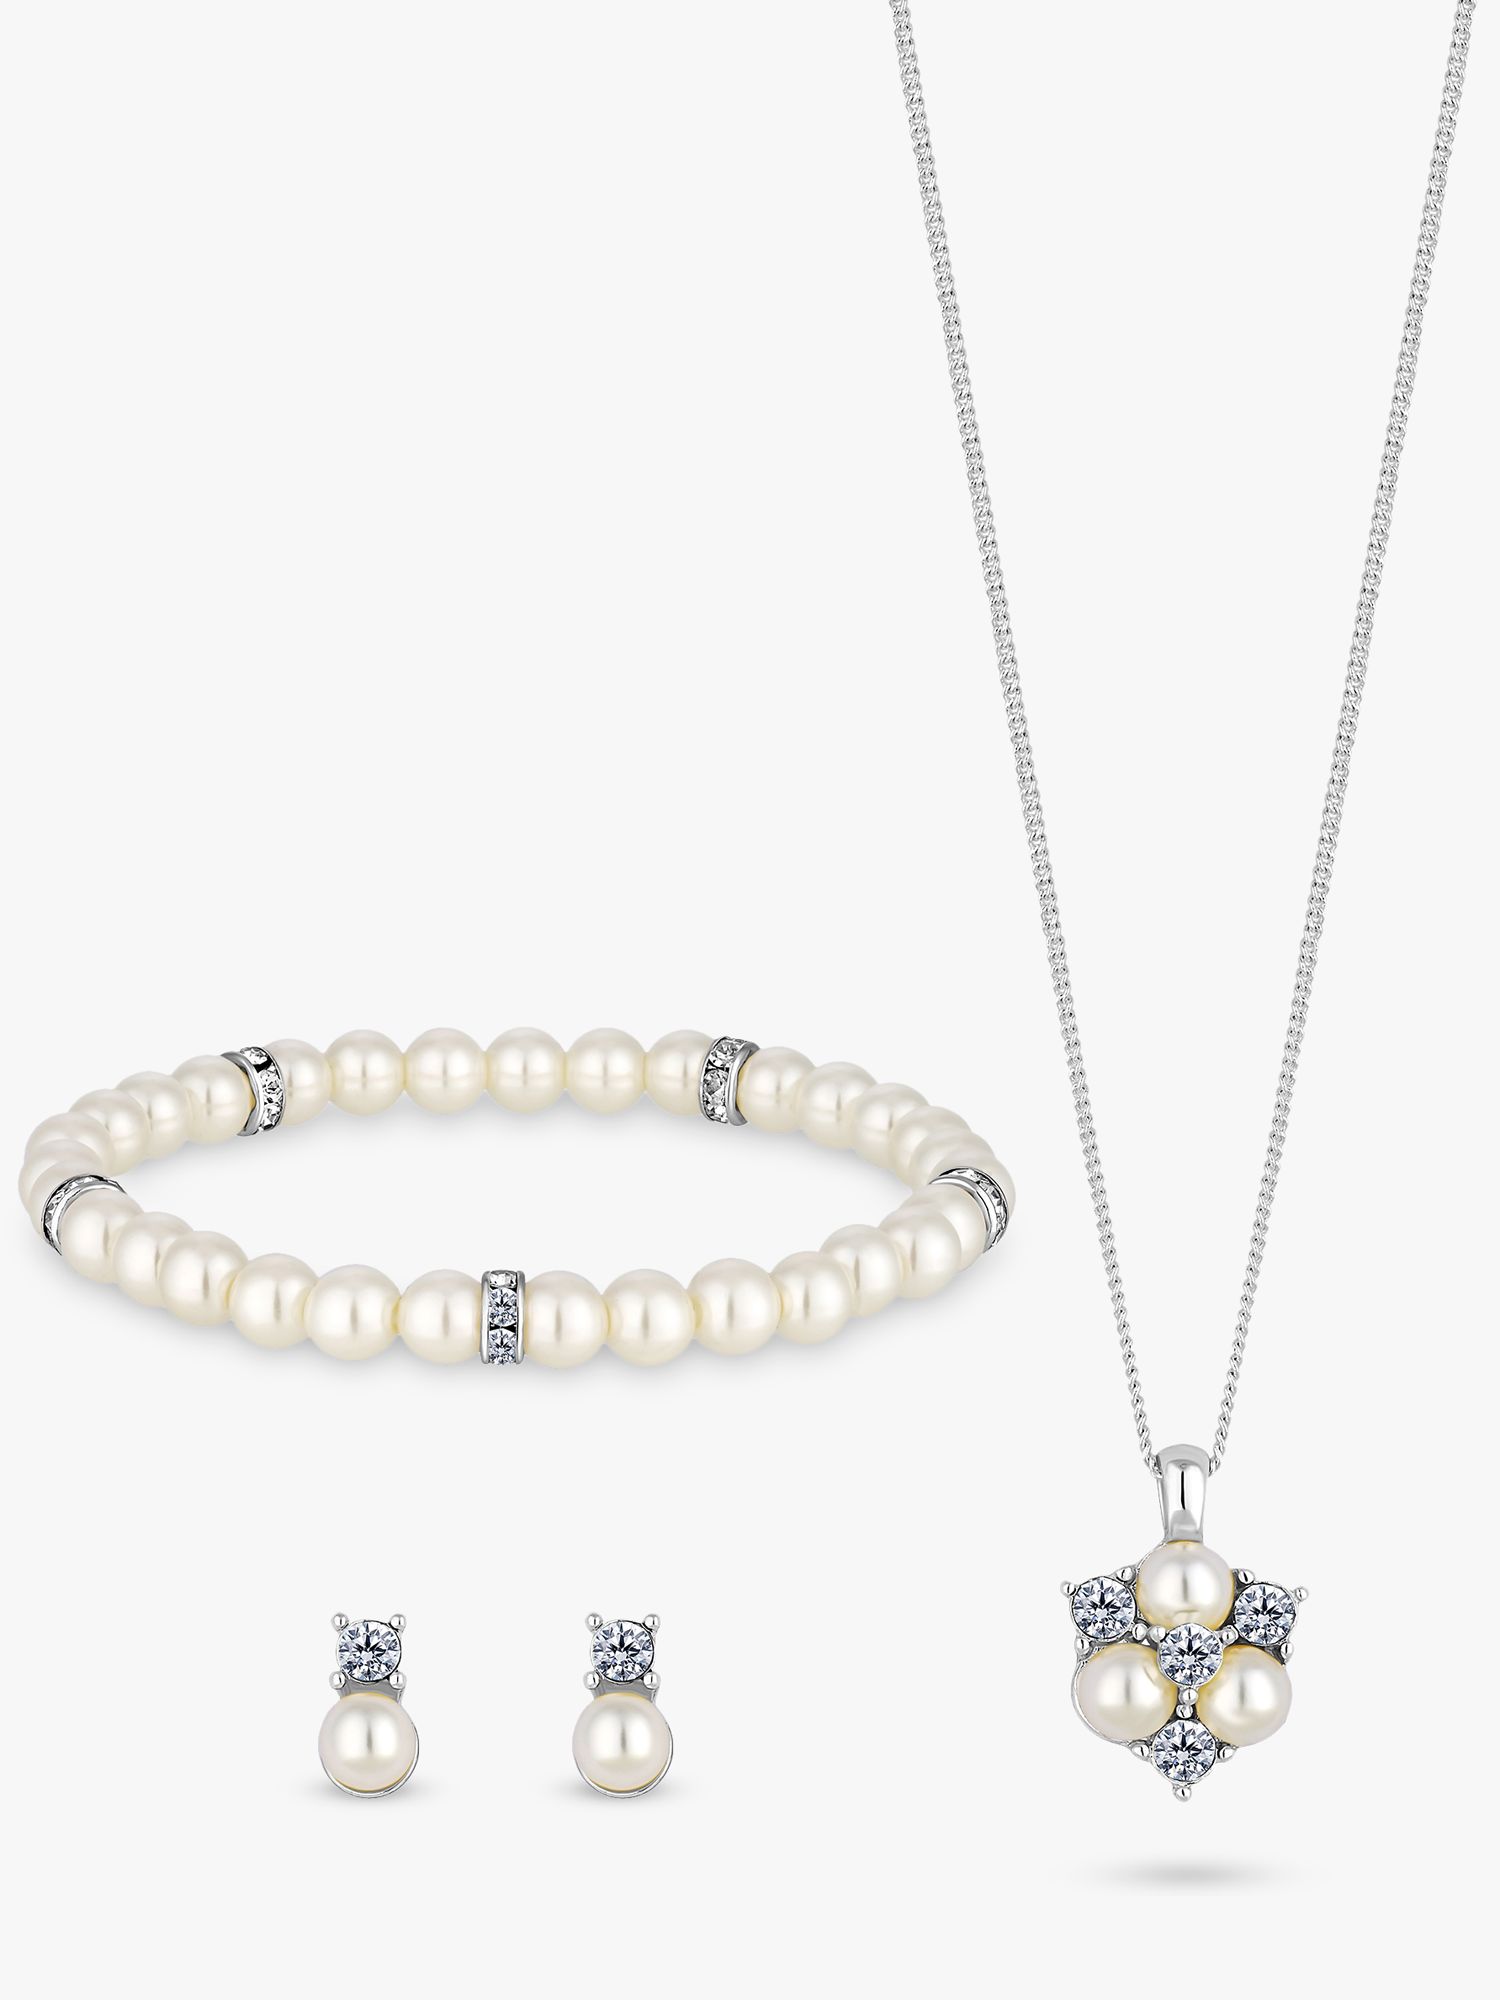 Buy Jon Richard Pearl & Crystals Pendant Necklace, Bracelet and Drop Earrings Jewellery Gift Set, Silver Online at johnlewis.com